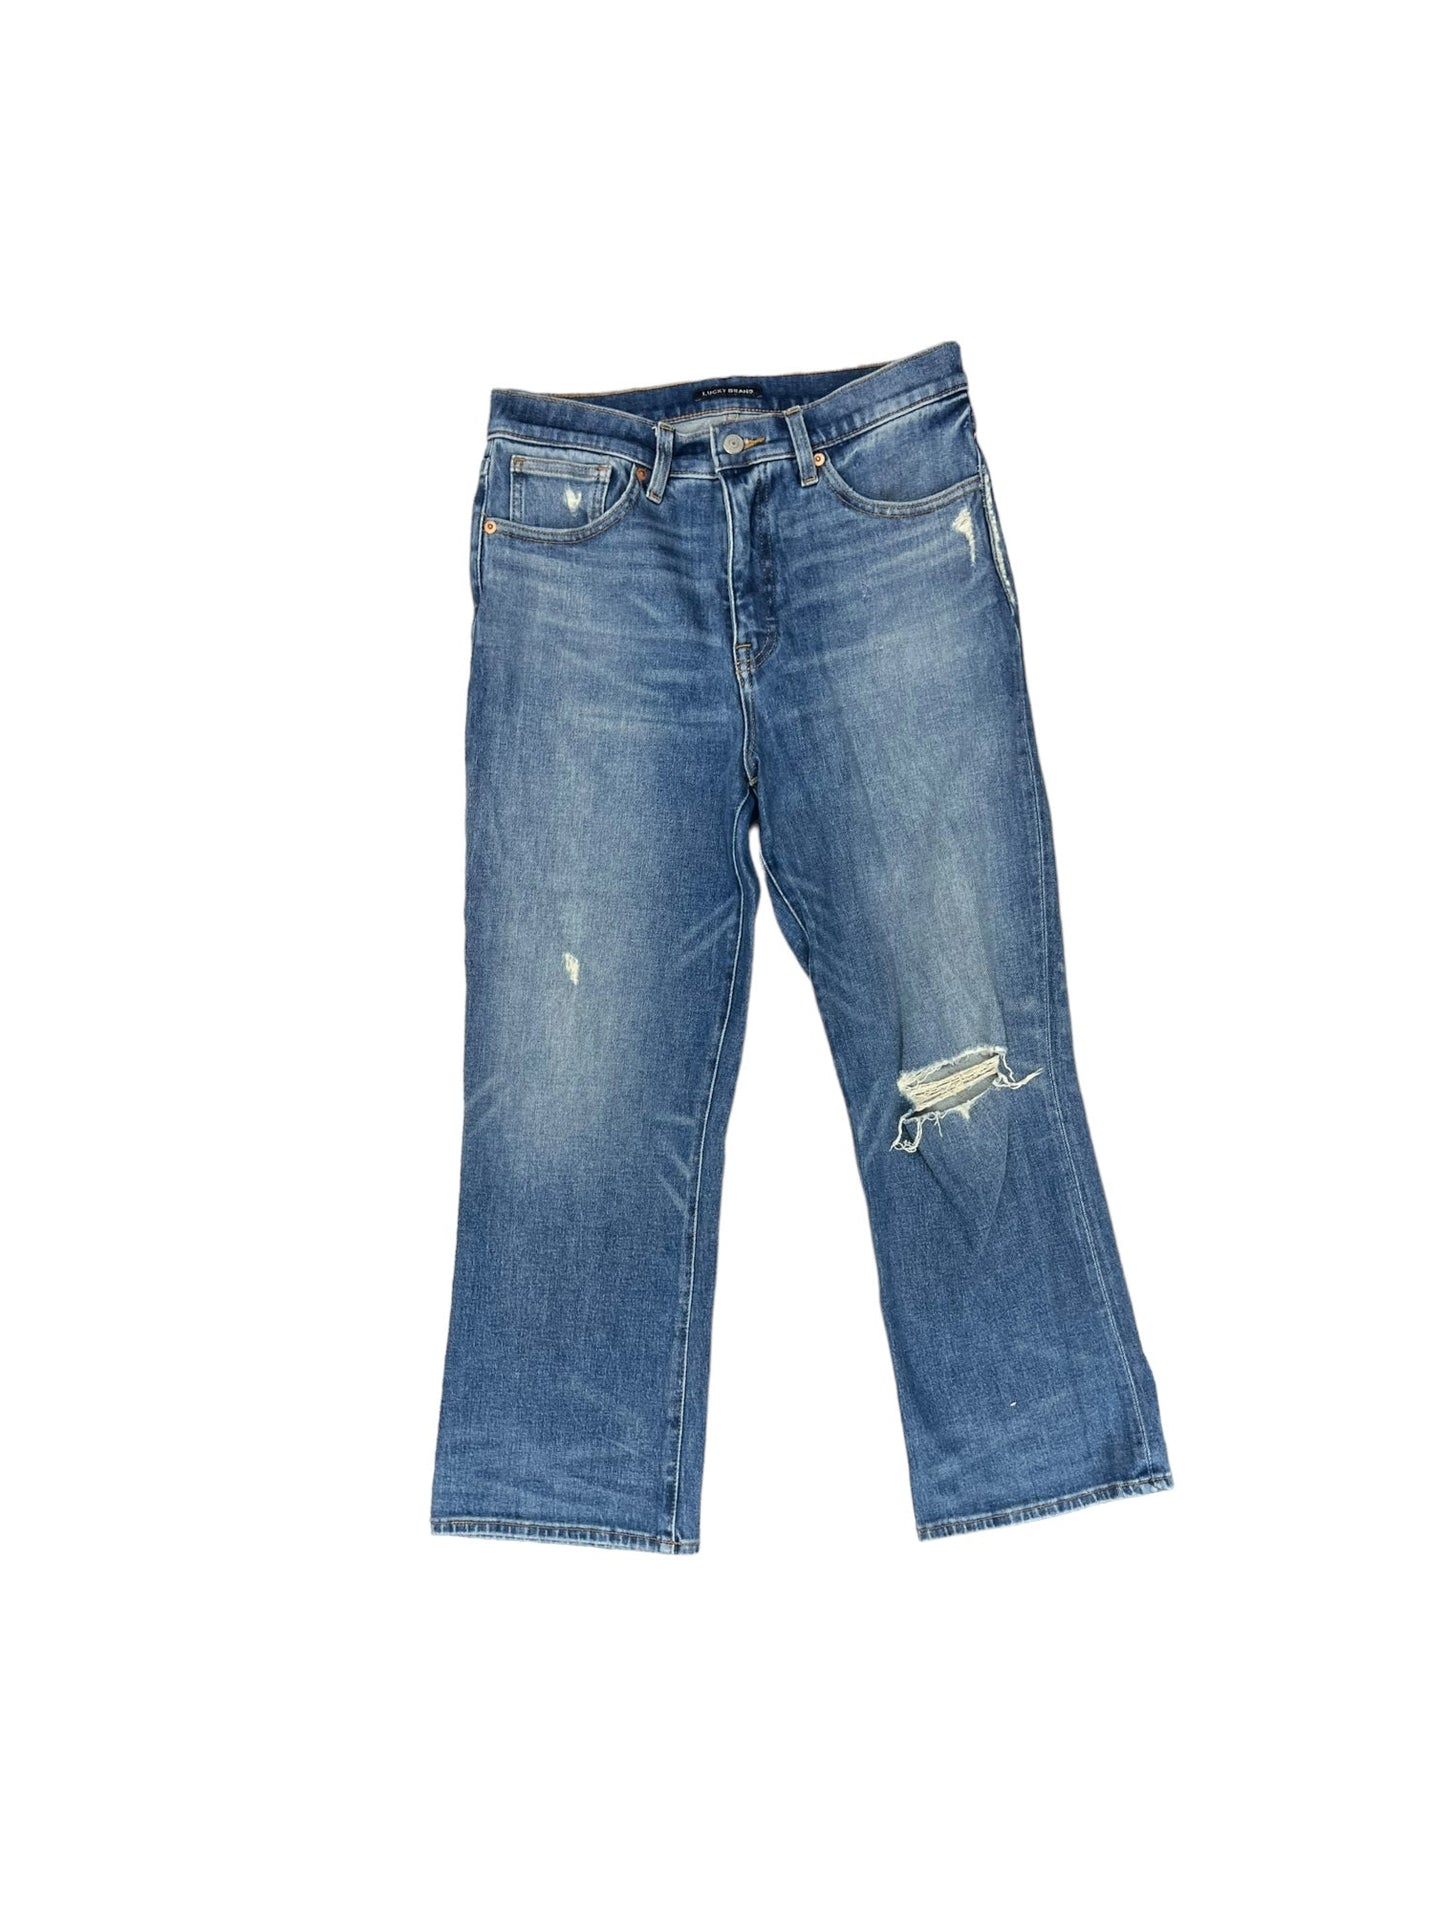 Blue Jeans Cropped Lucky Brand, Size 10